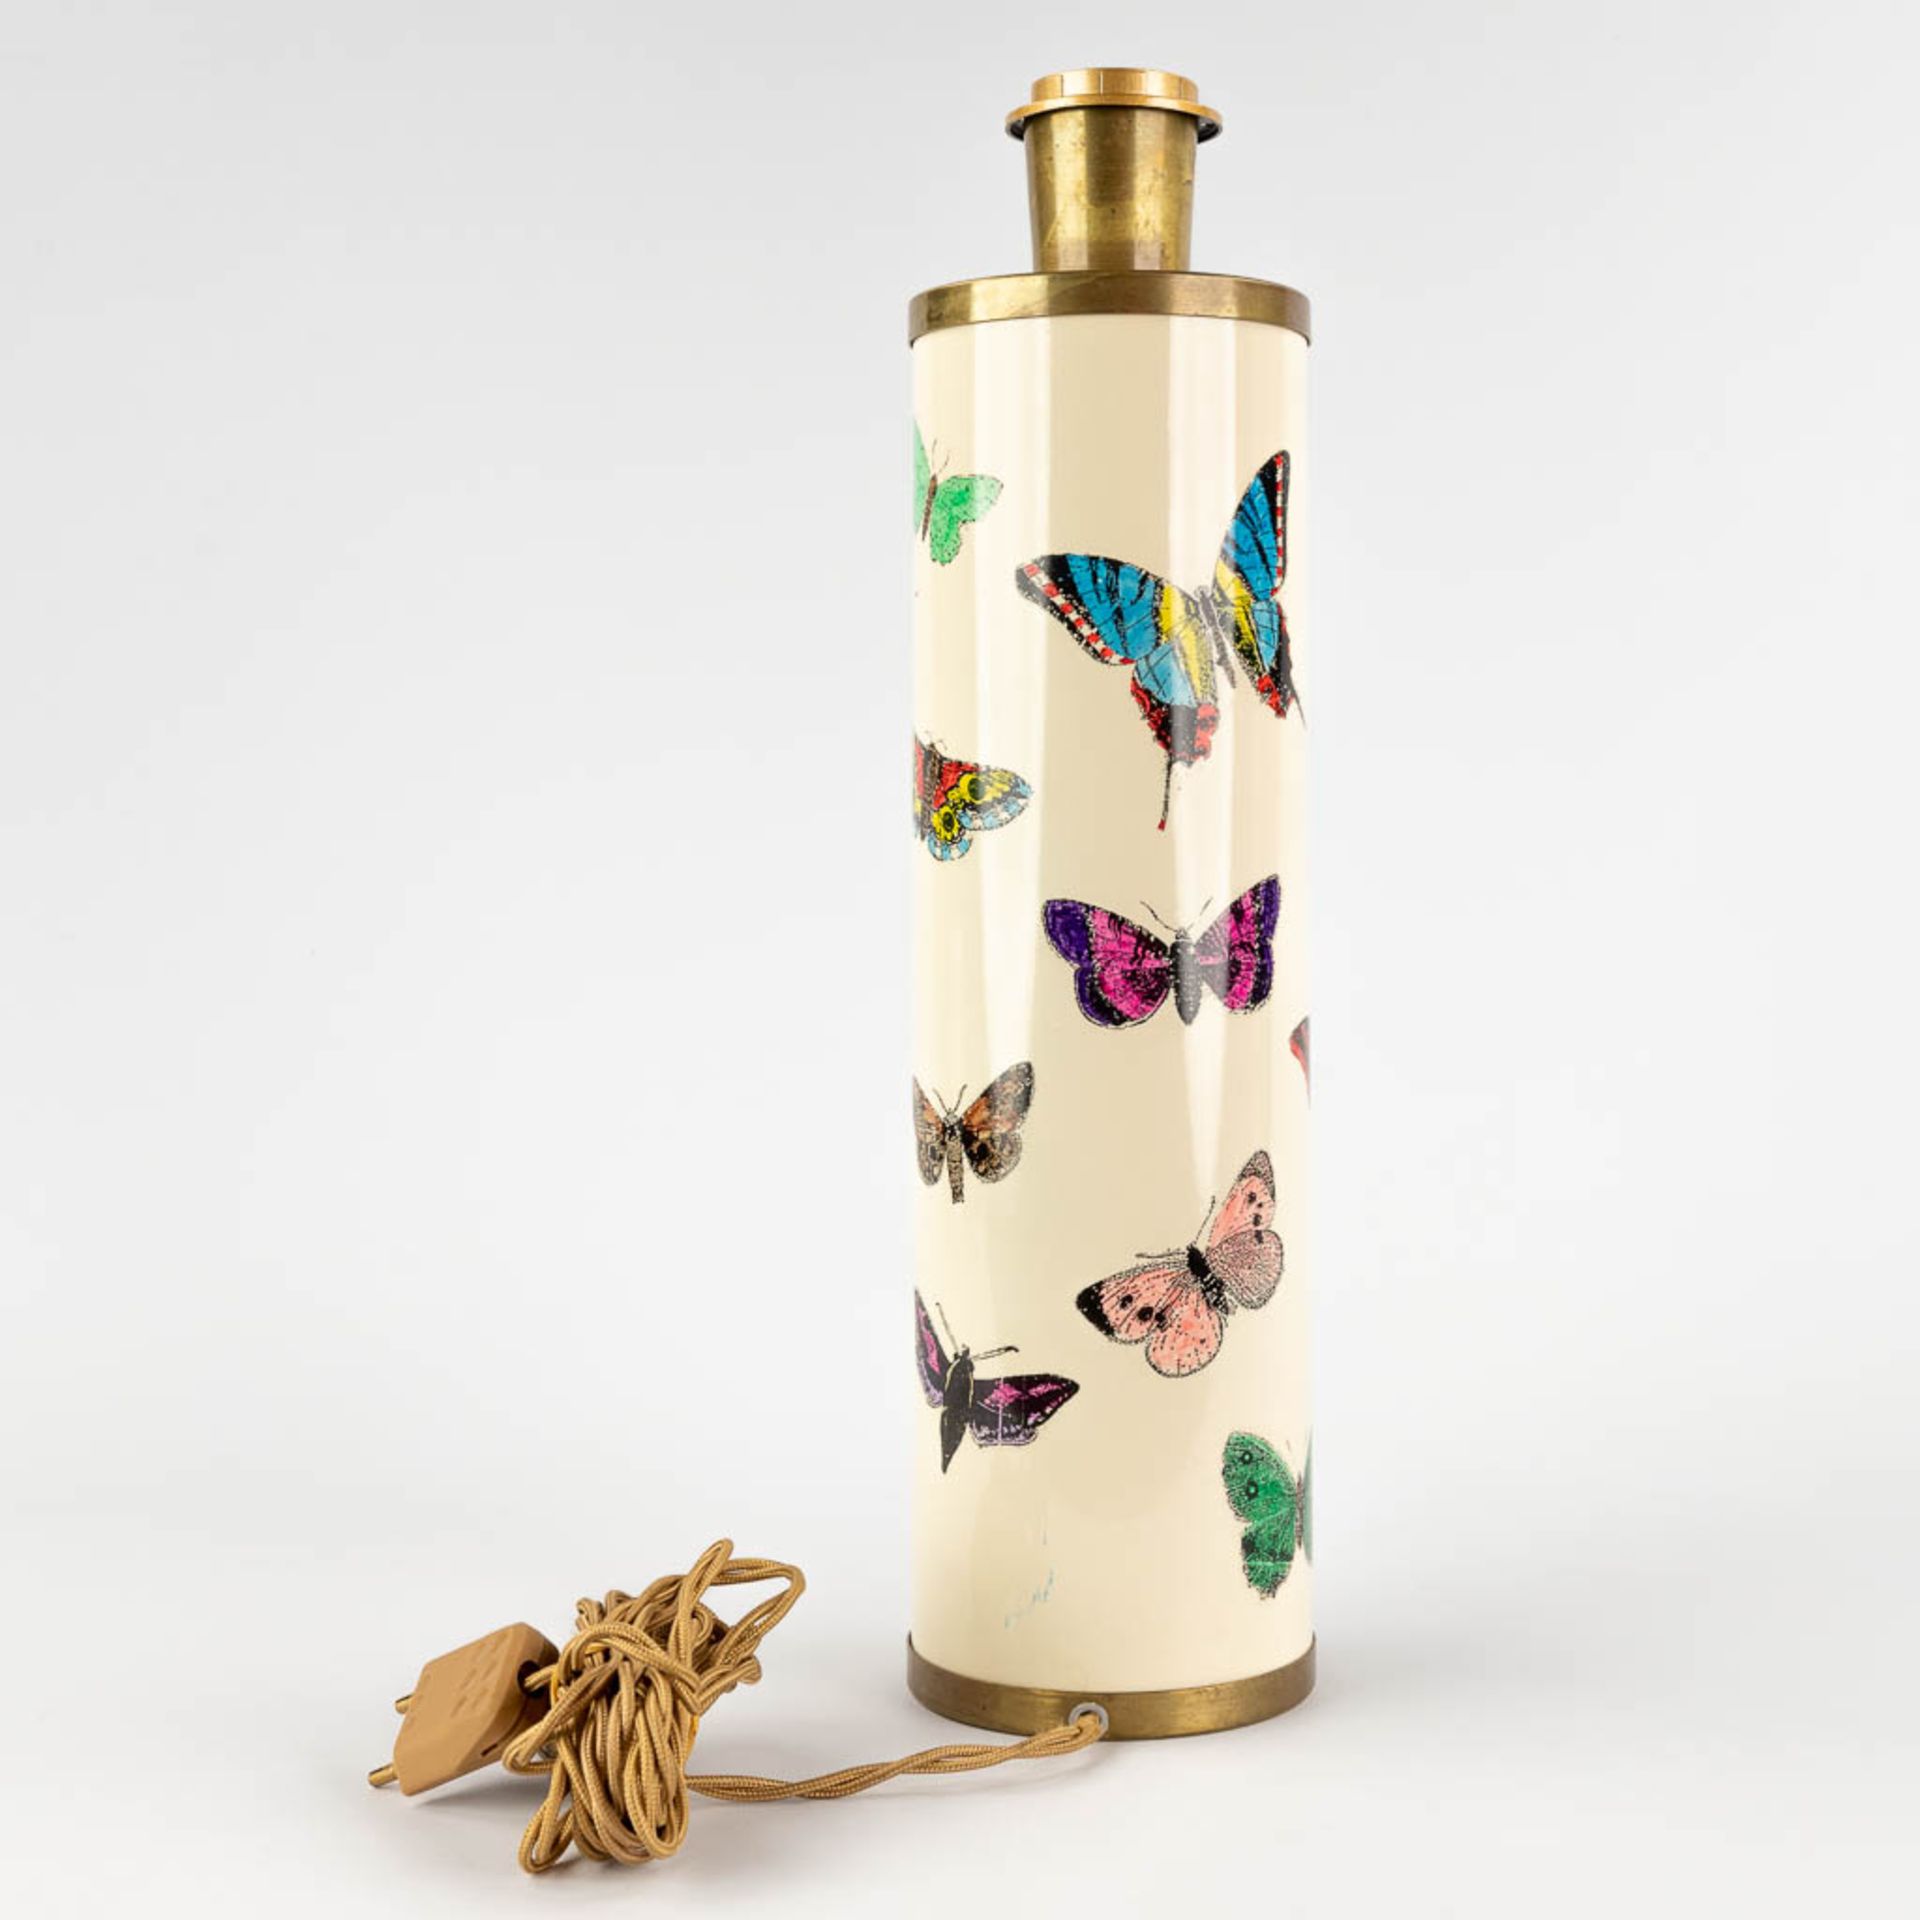 Piero FORNASETTI (1913-1988) 'Farfalla', table lamp with butterfly decor. (H:41 x D:10,5 cm) - Image 4 of 11